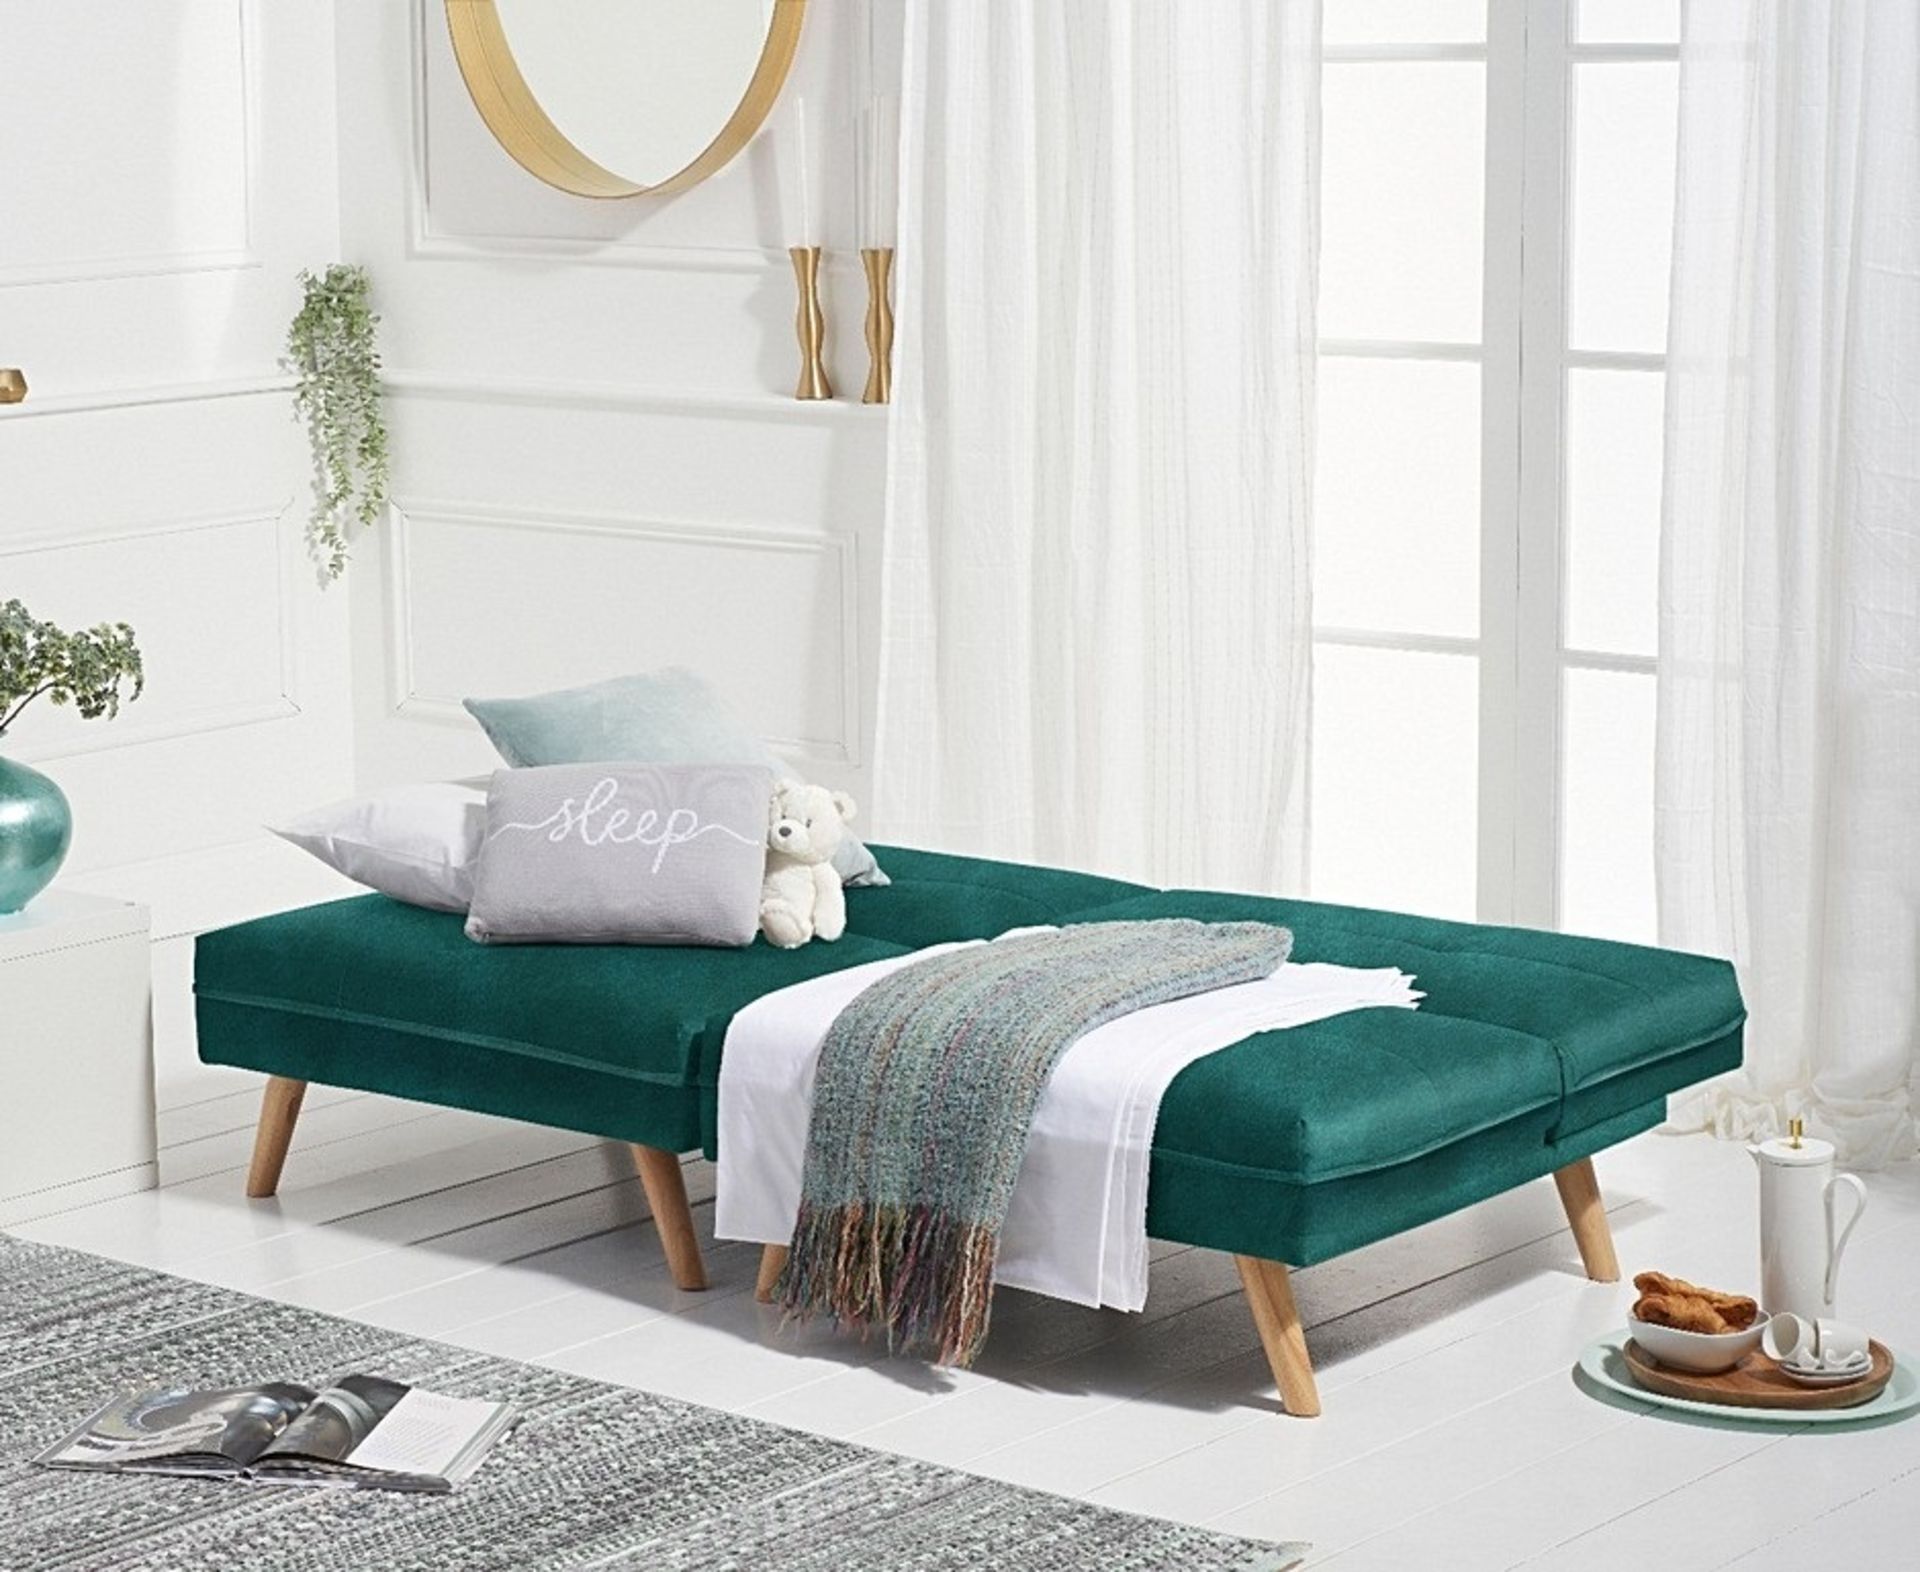 Ivy Green Velvet 3 Seater Fold Down Sofa Bed The Eye-Catching Ivy Sofa Bed Folds In A Number Of